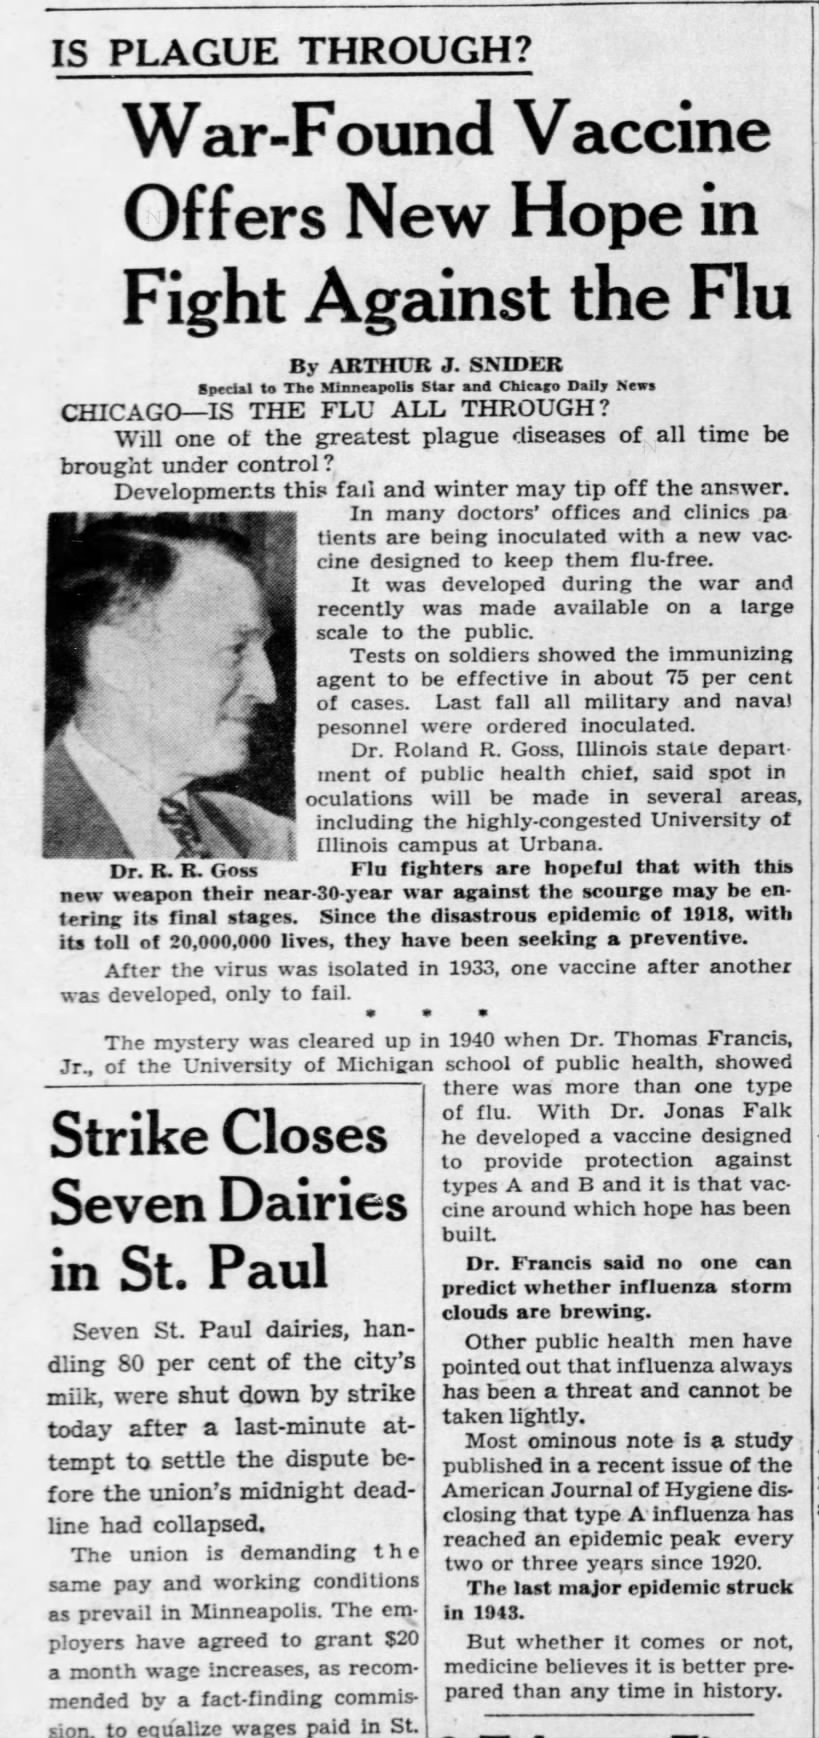 "War-Found Vaccine Offers New Hope in Fight Against the Flu" (Minneapolis Star, 1946)